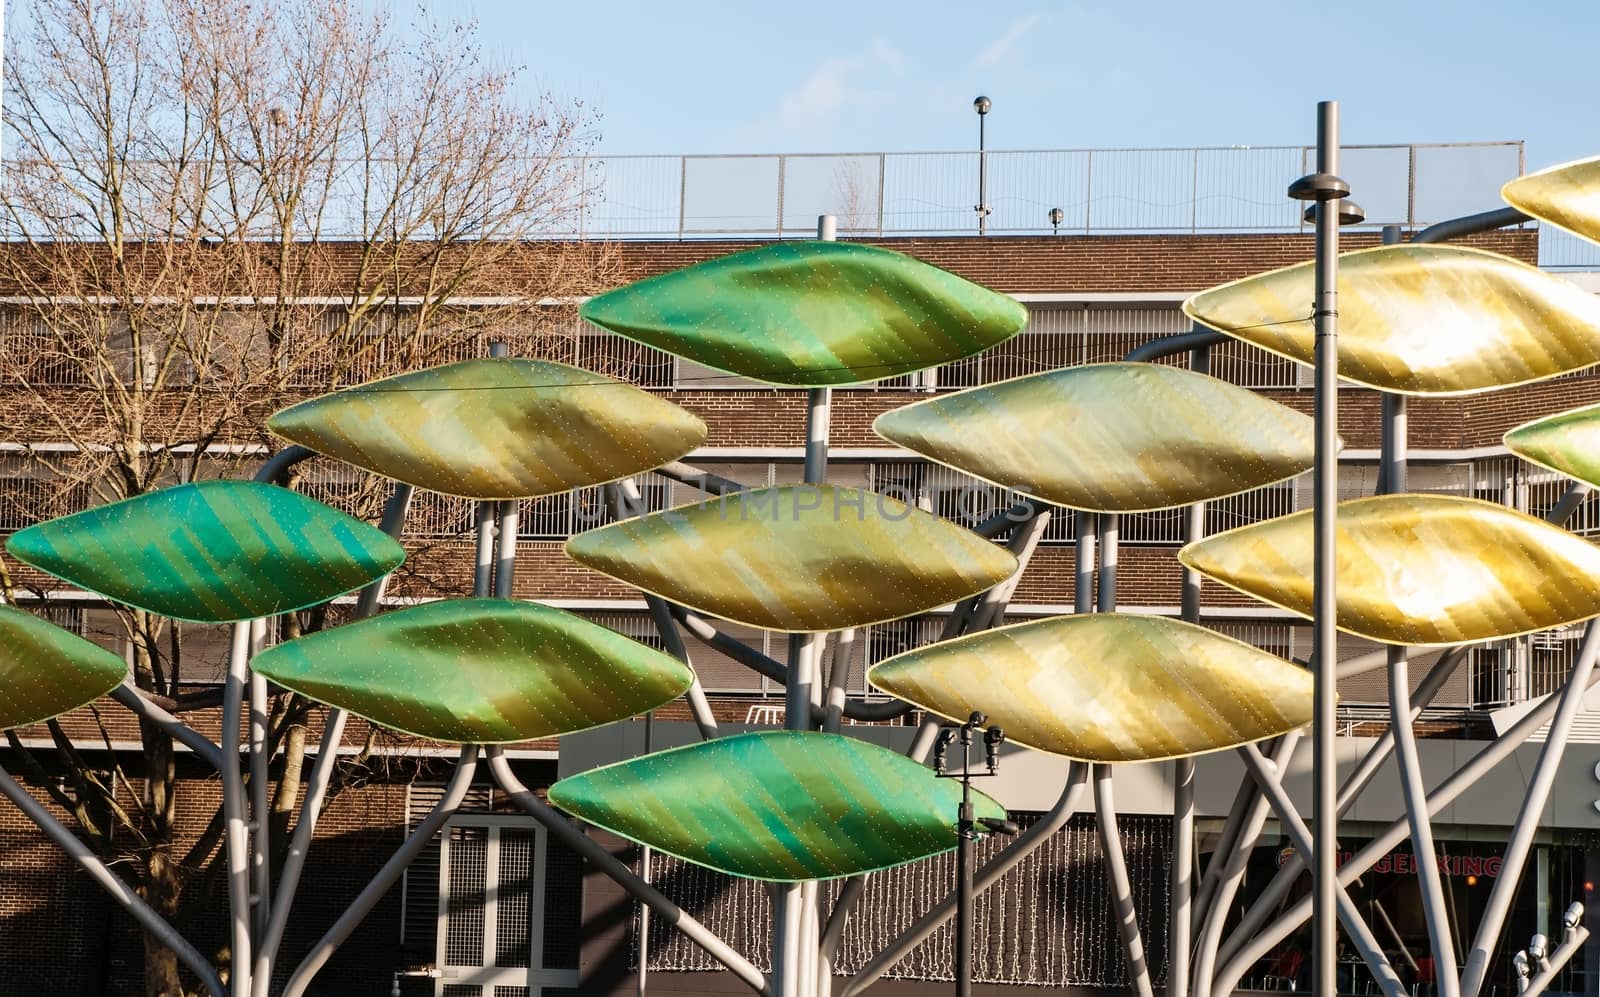 Architects and urban designers Studio Egret West have designed a shimmering wall of titanium fish in front of Stratford Centre.